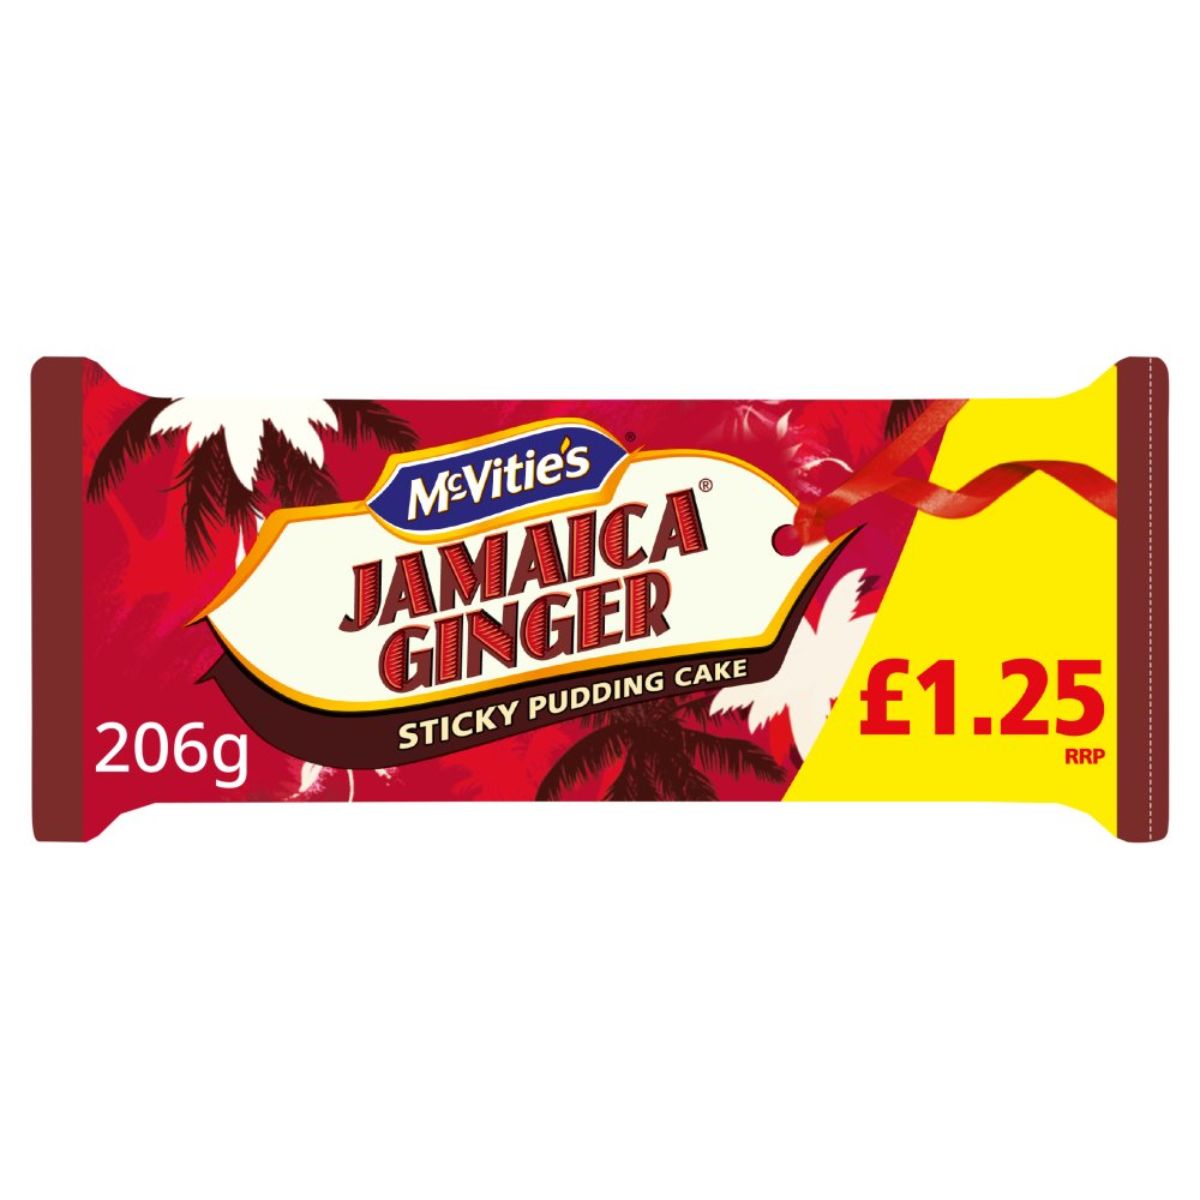 Mcvities - Jamaican Ginger Sticky Pudding Cake - 206g's Mcvities - Jamaican Ginger Sticky Pudding Cake - 206g's Mcvities - Jamaican Ginger Sticky Pudding Cake - 206g's Mcvities - Jamaican Ginger Sticky Pudding Cake - 206g's Mcvities - Jamaican Ginger Sticky Pudding Cake - 206g's Mcvities - Jamaican Ginger Sticky Pudding Cake - 206g's Mcvities - Jamaican Ginger Sticky Pudding Cake†-†206gs, and Mcvitiess.